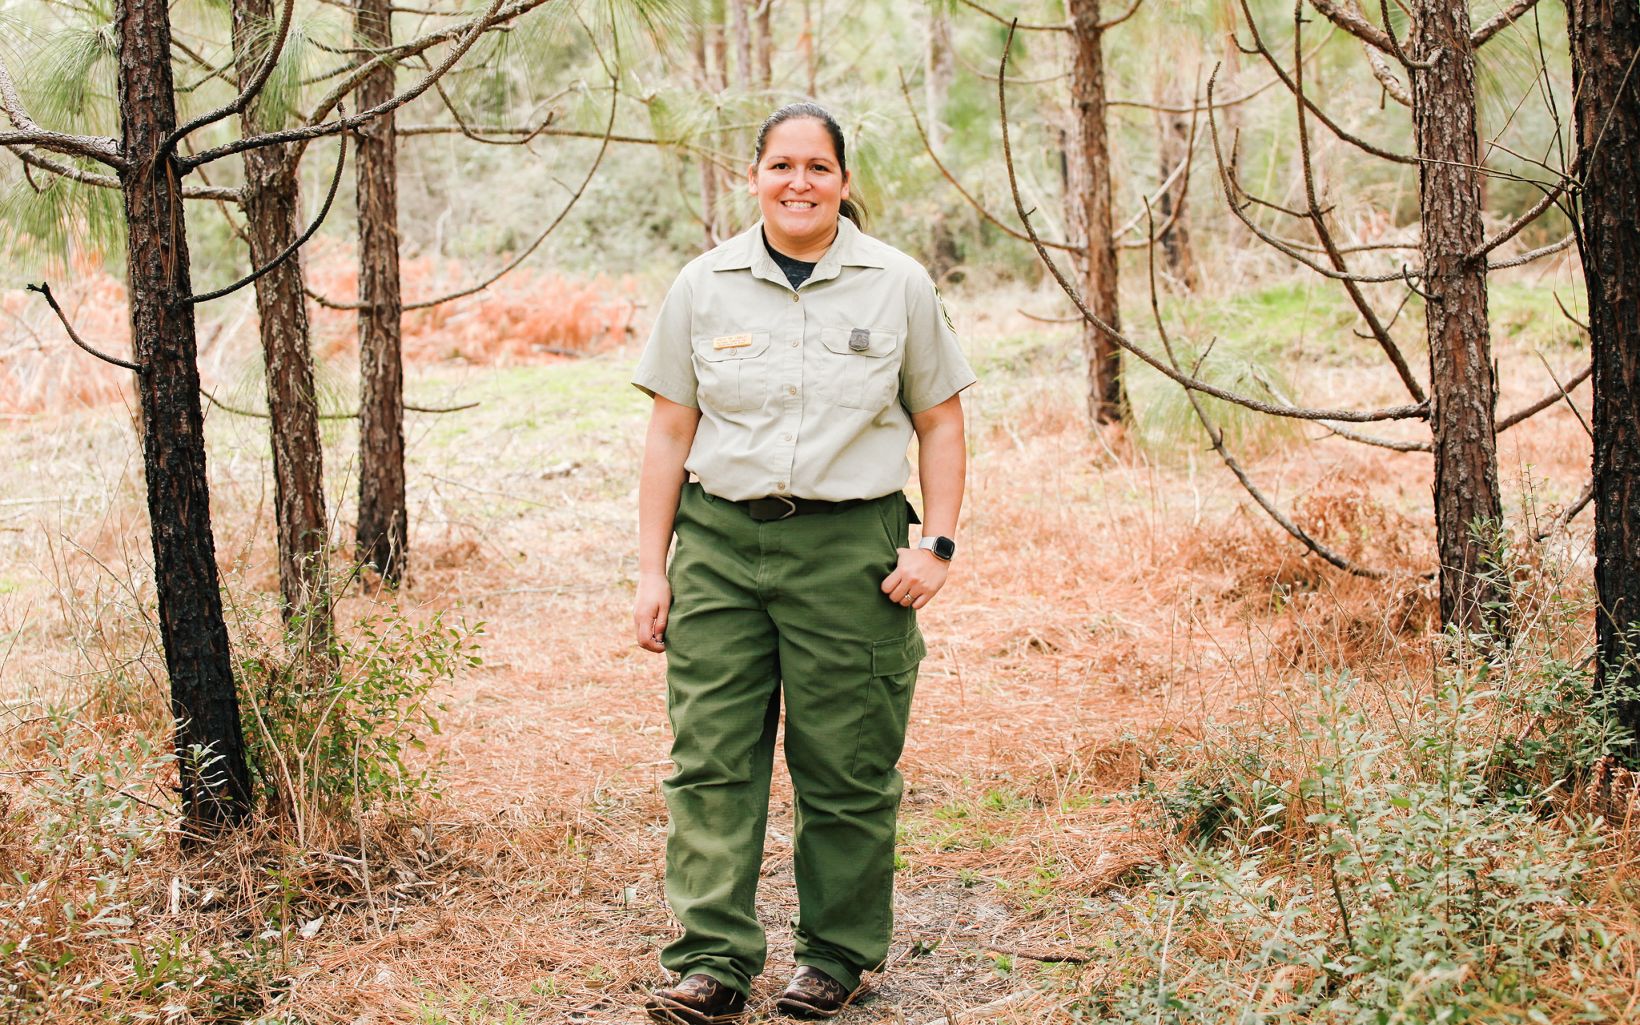 Krista 'KK' Langley, a tribal citizen and USDA Forest Service employee, smiles brightly as she stands among fallen needles and lengthy longleaf trunks.